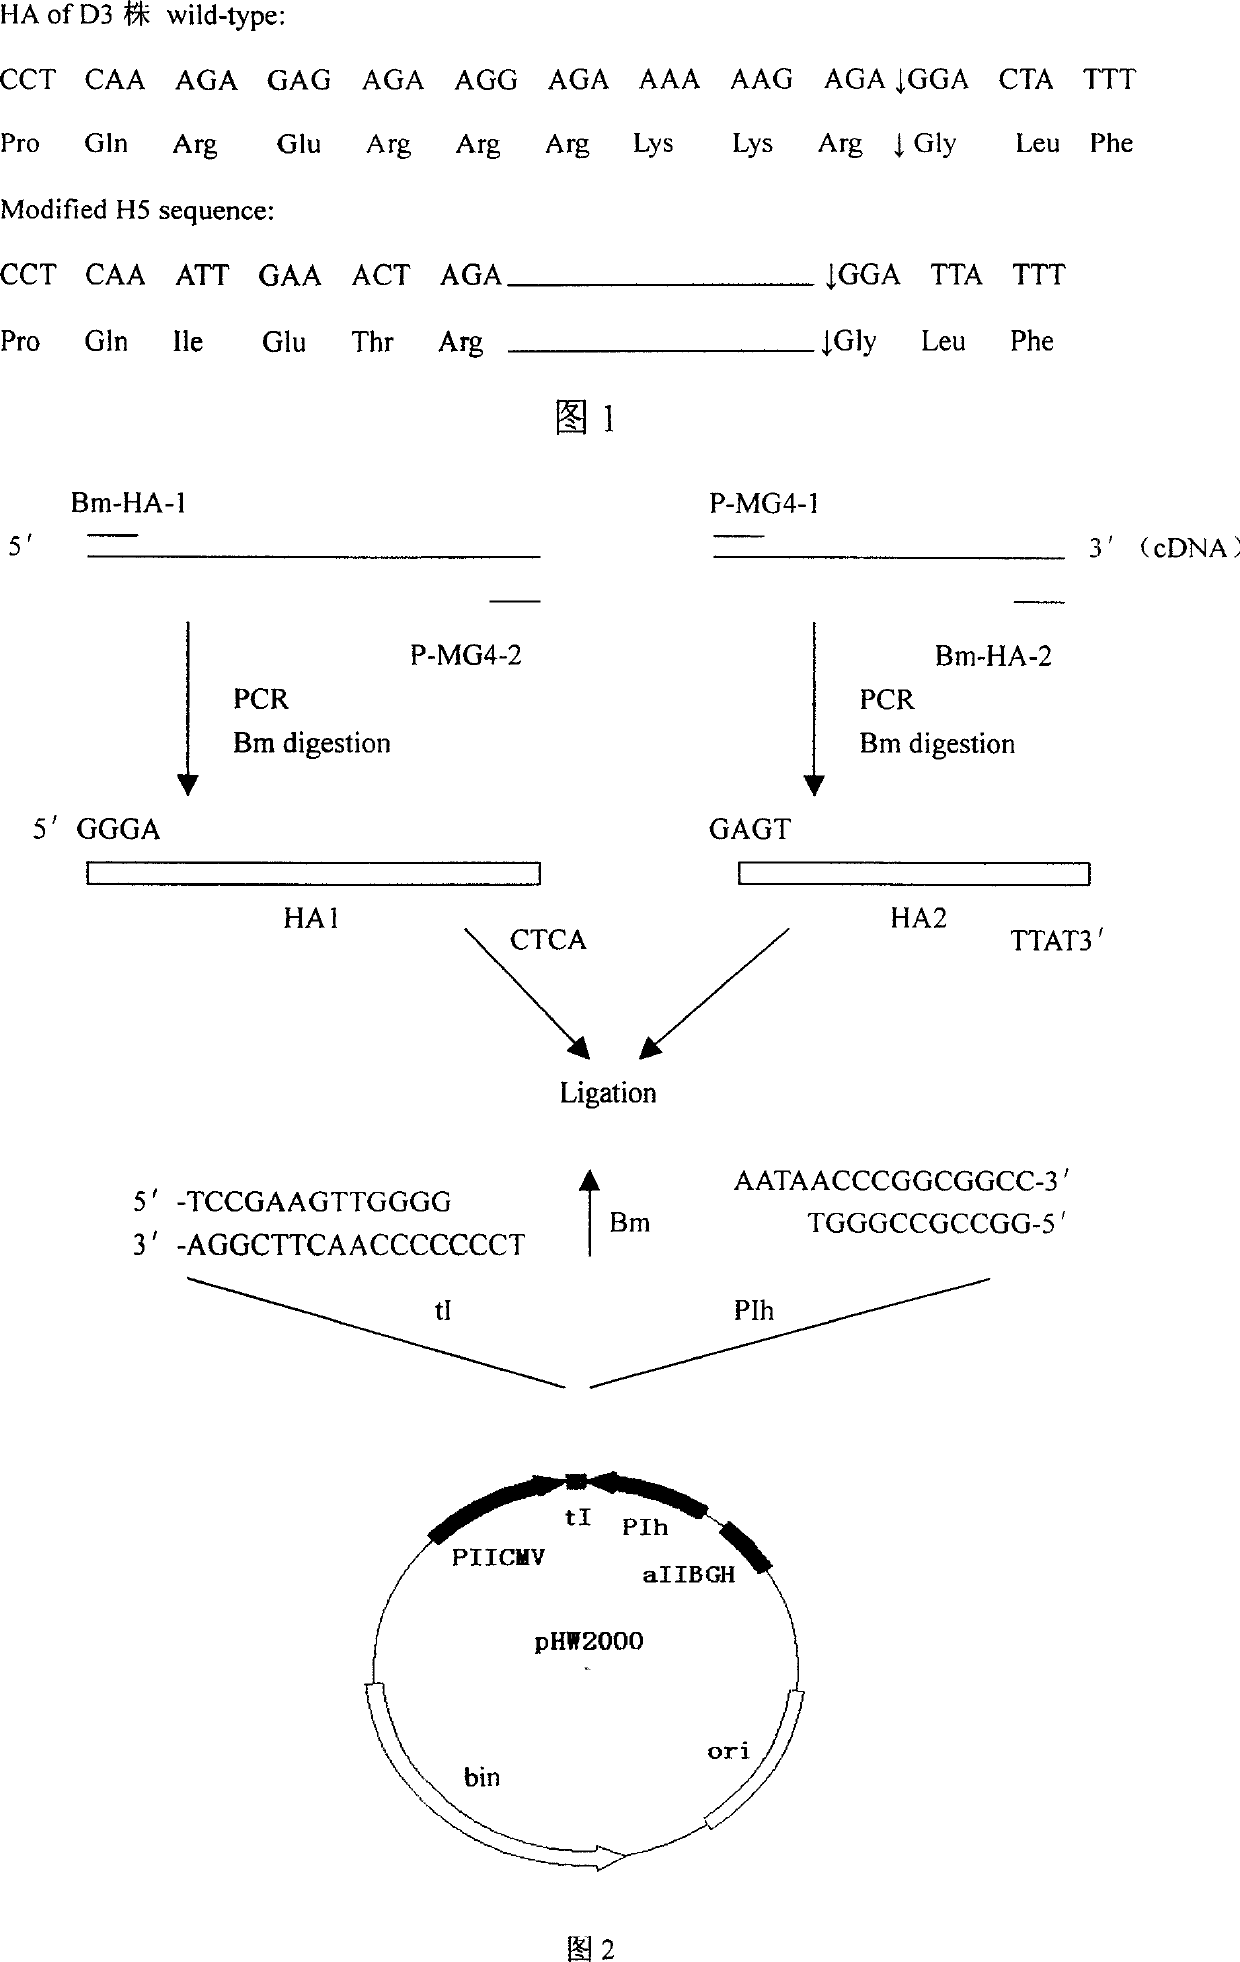 Gene recombinant fowl influenza virus D3/F-R2/6 and its construction method